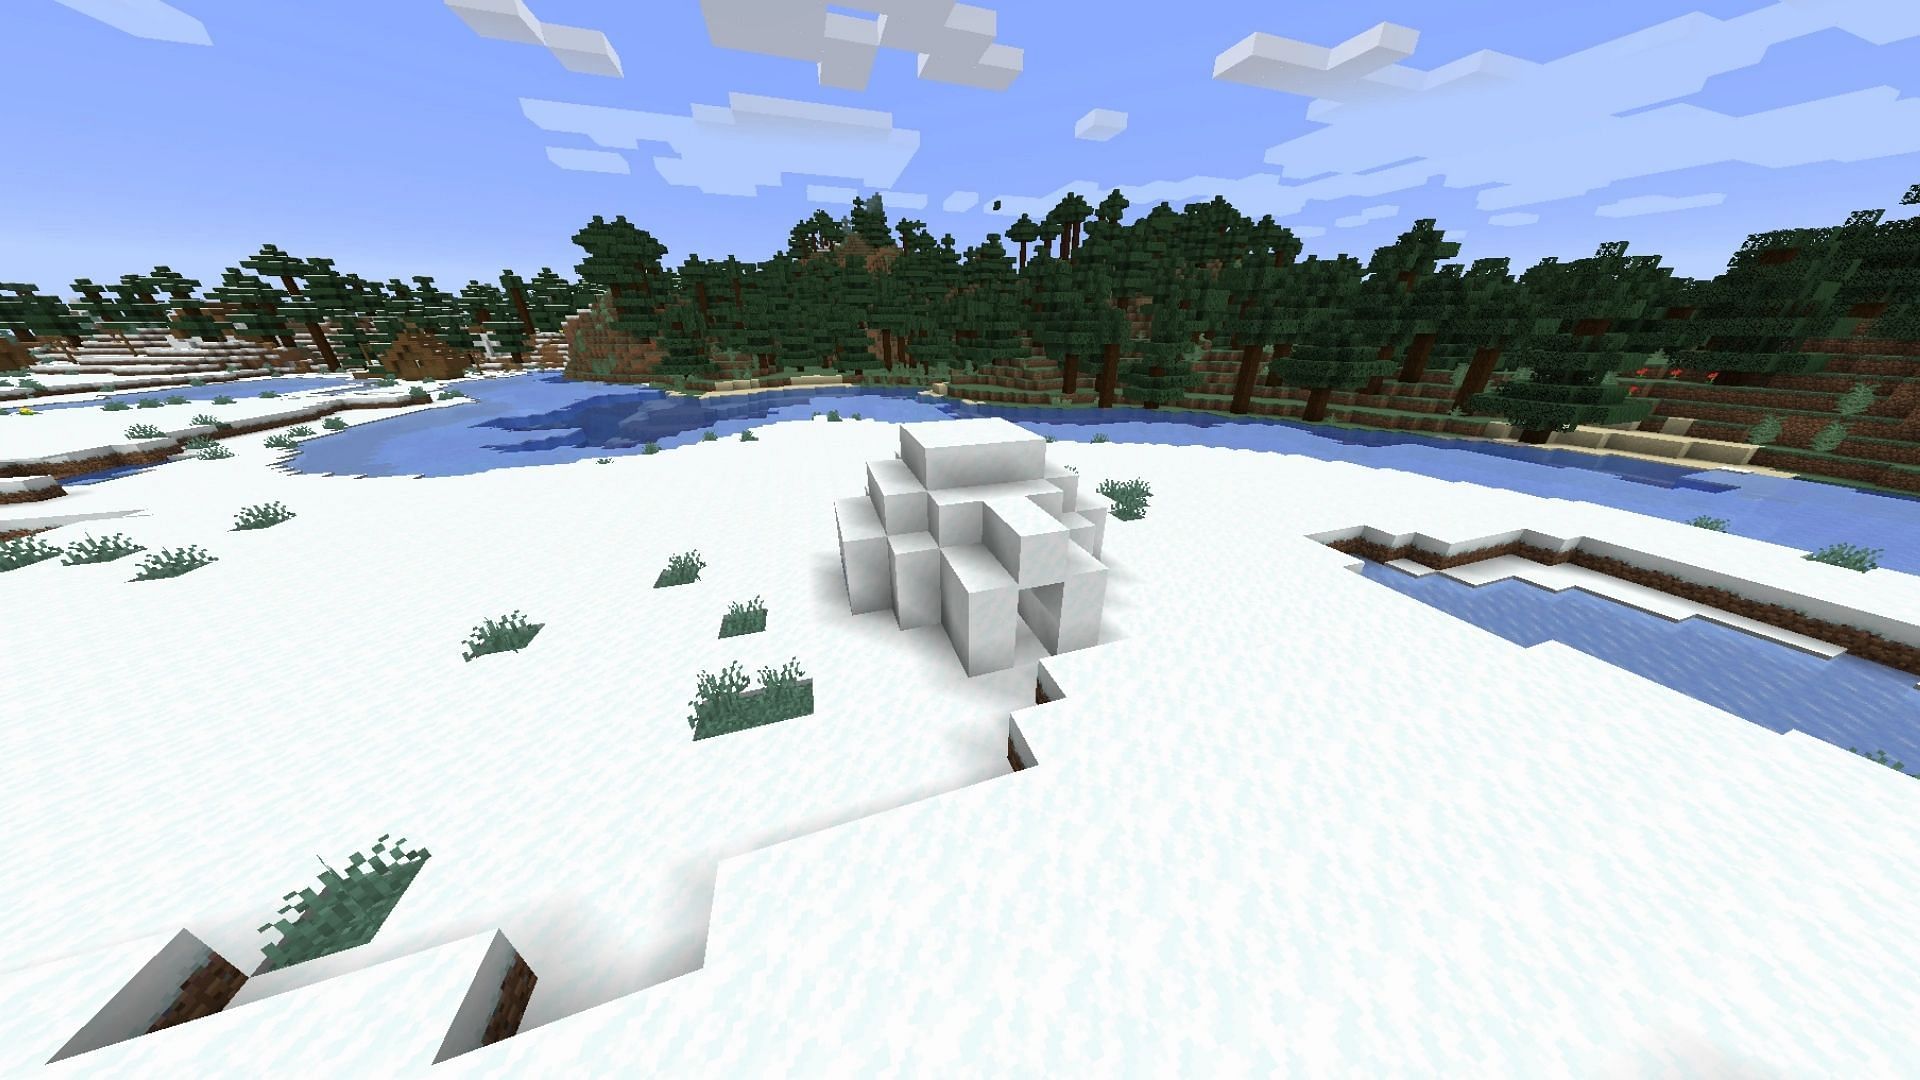 Igloo will mainly have a Zombie Villager and a Golden Apple (Image via Minecraft Fandom Wiki)